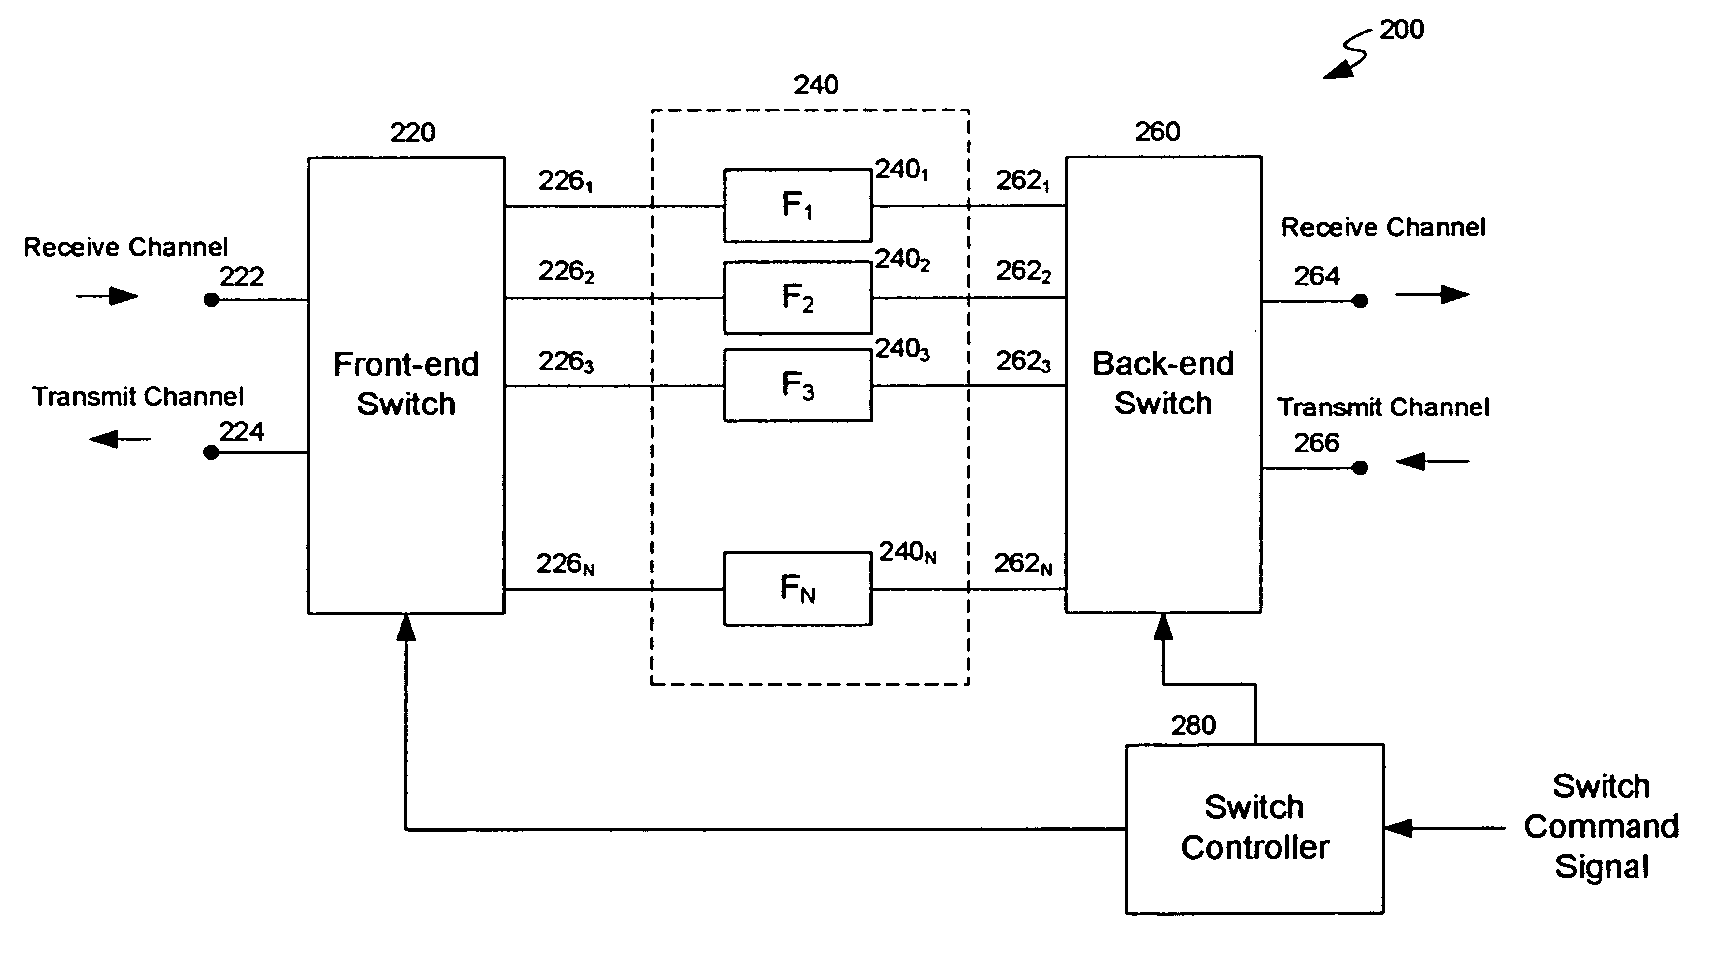 Multi-channel filtering system for transceiver architectures